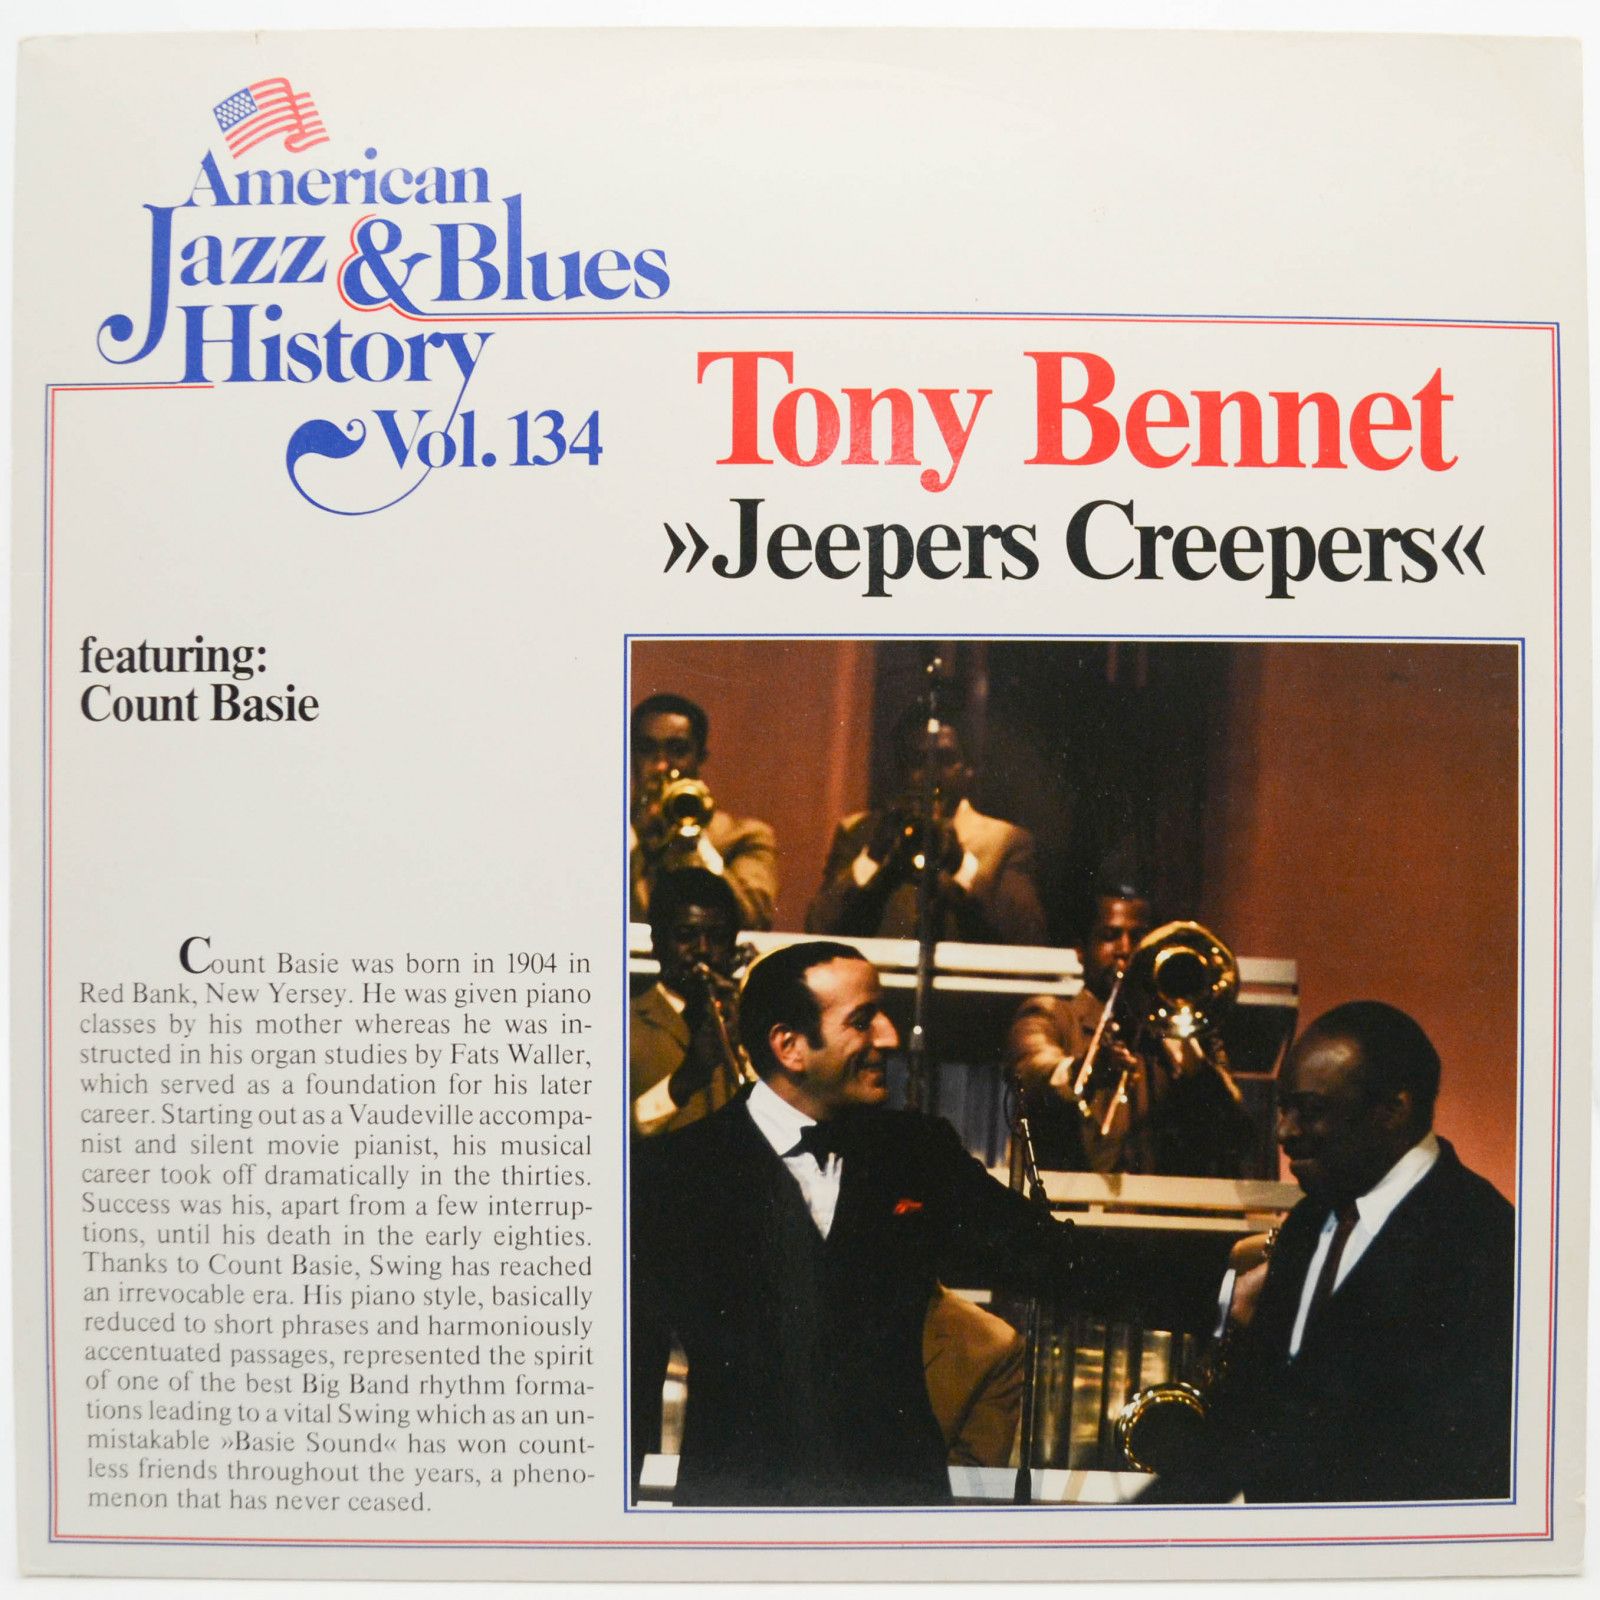 Tony Bennet featuring: Count Basie — "Jeepers Creepers", 1984